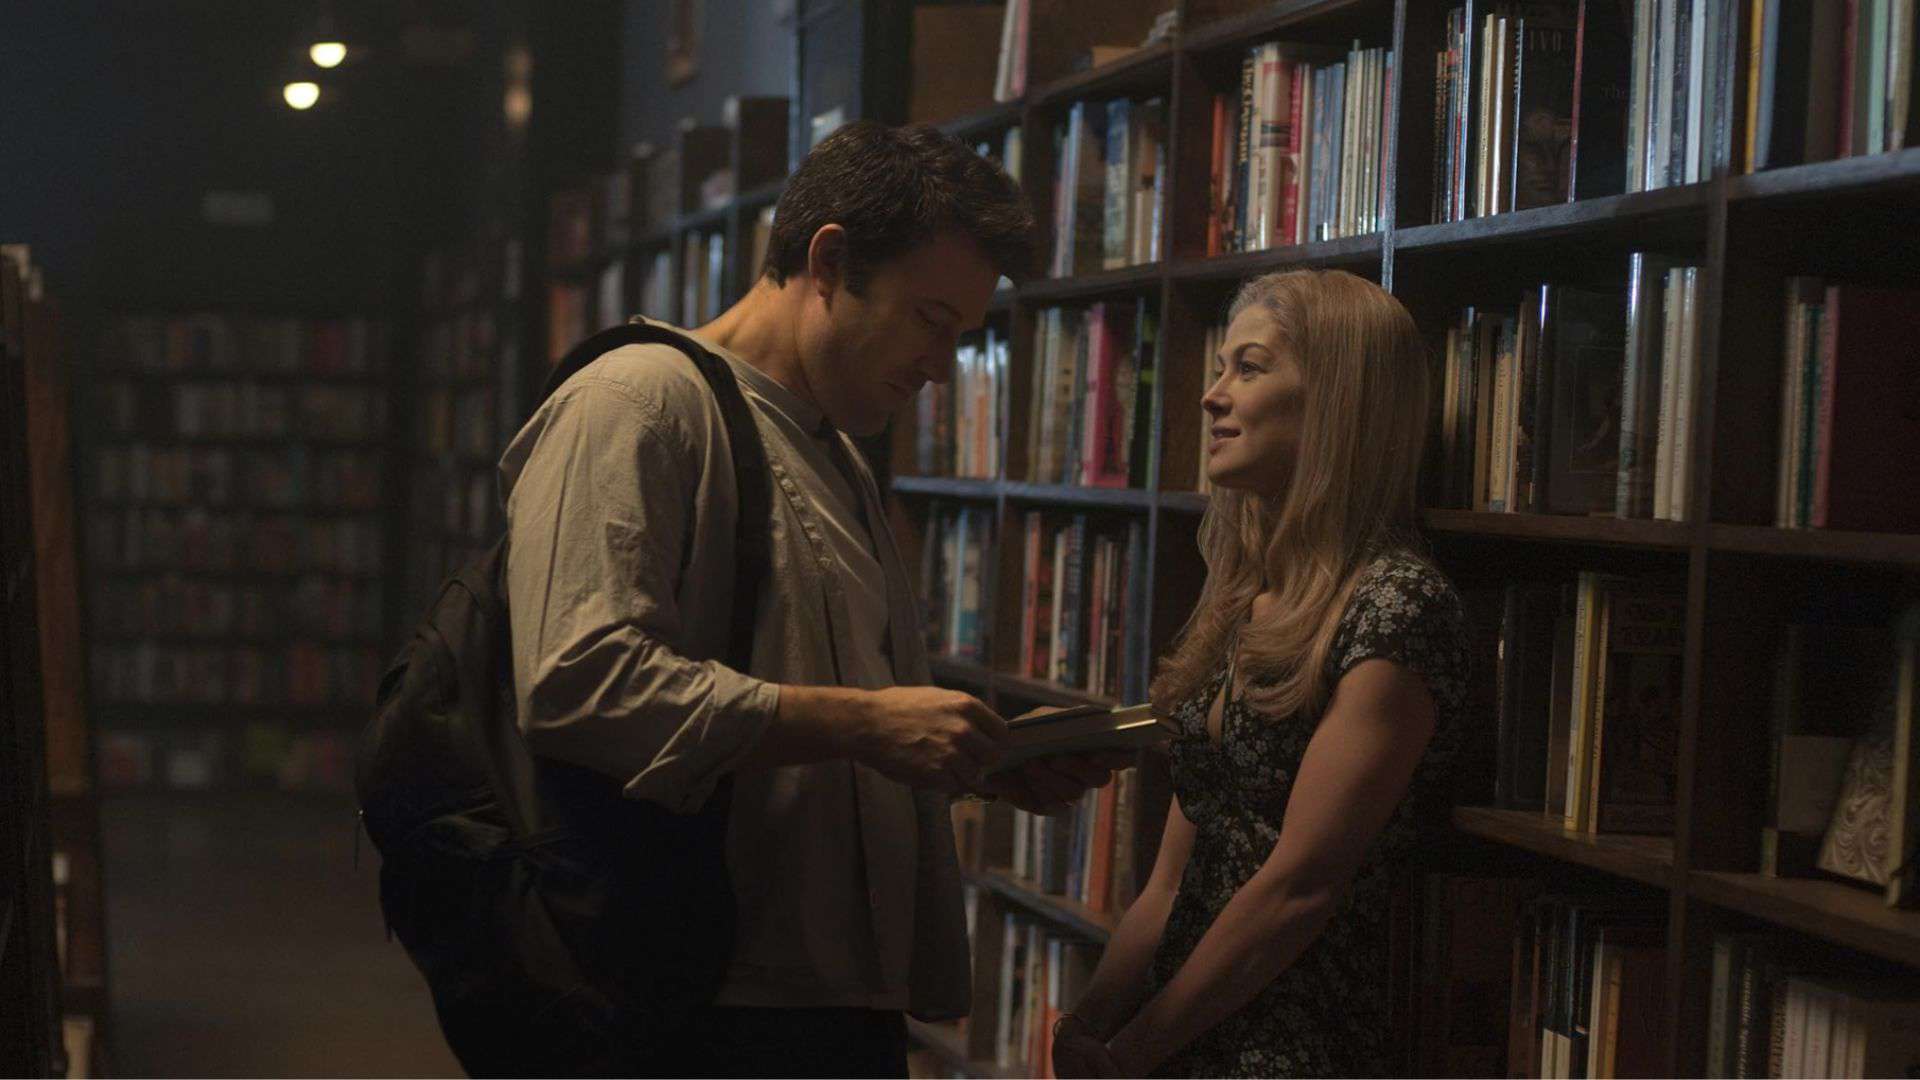 A man flirts with a woman in a library in this image from 20th Century Fox.